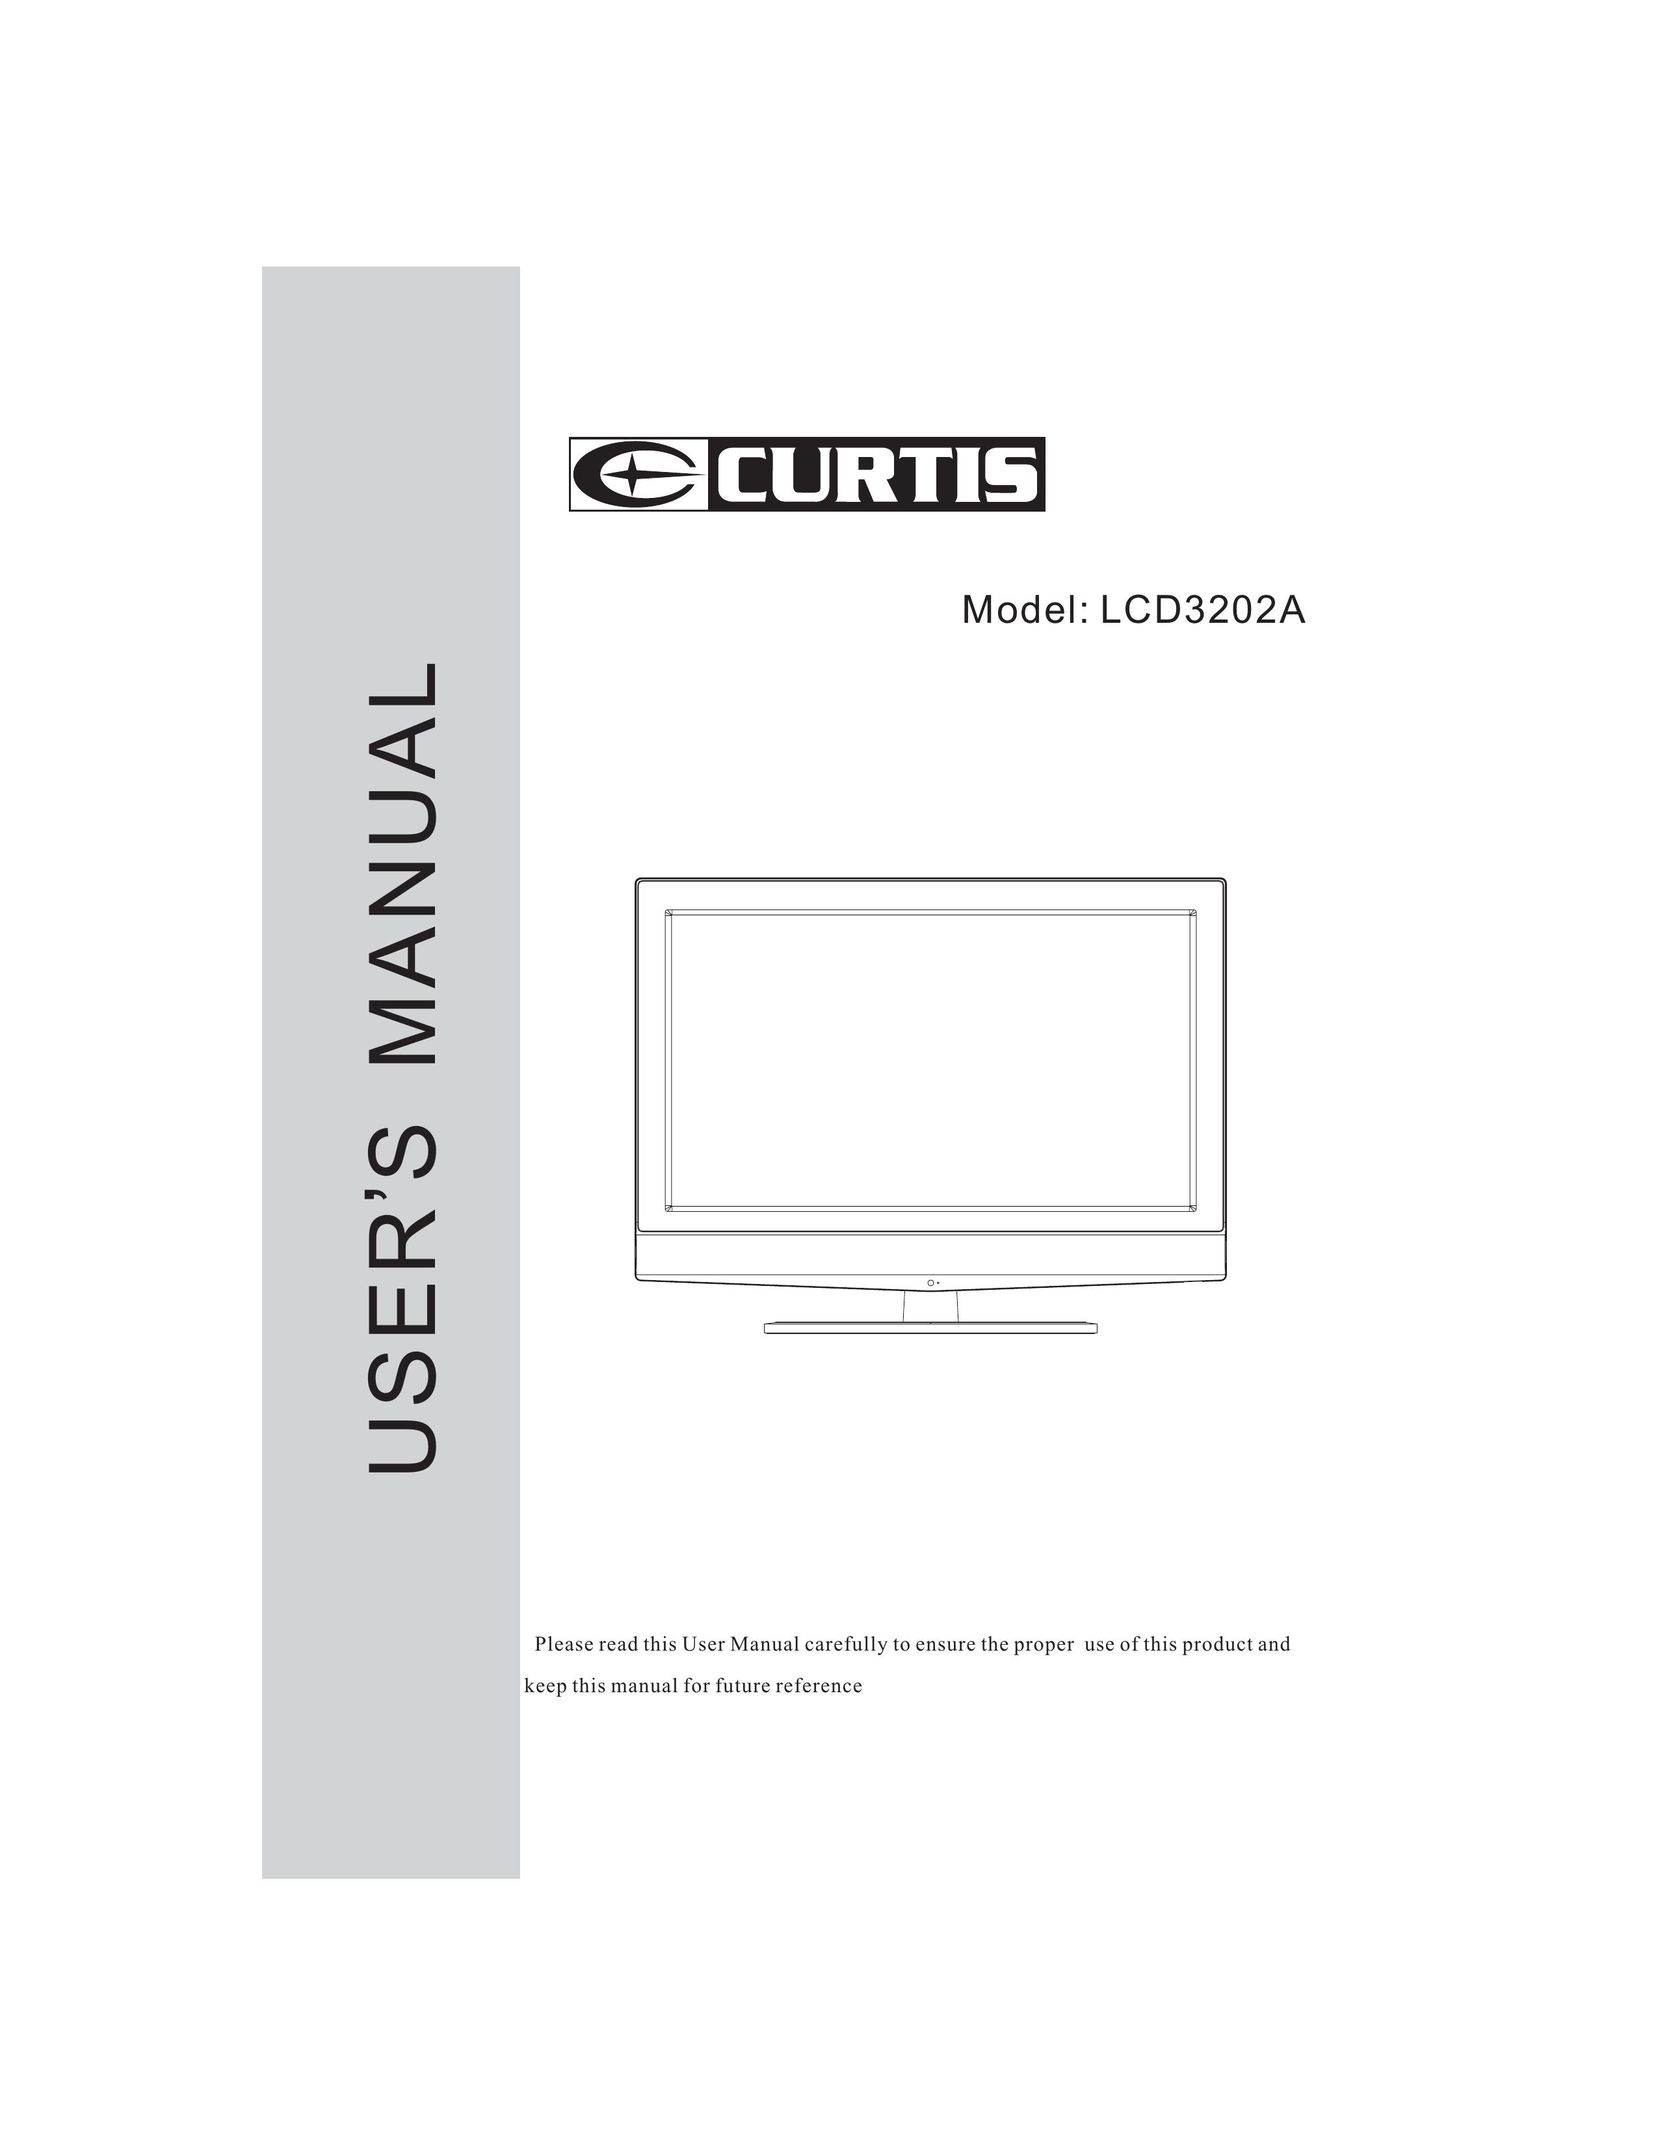 Curtis LCD3202A Flat Panel Television User Manual